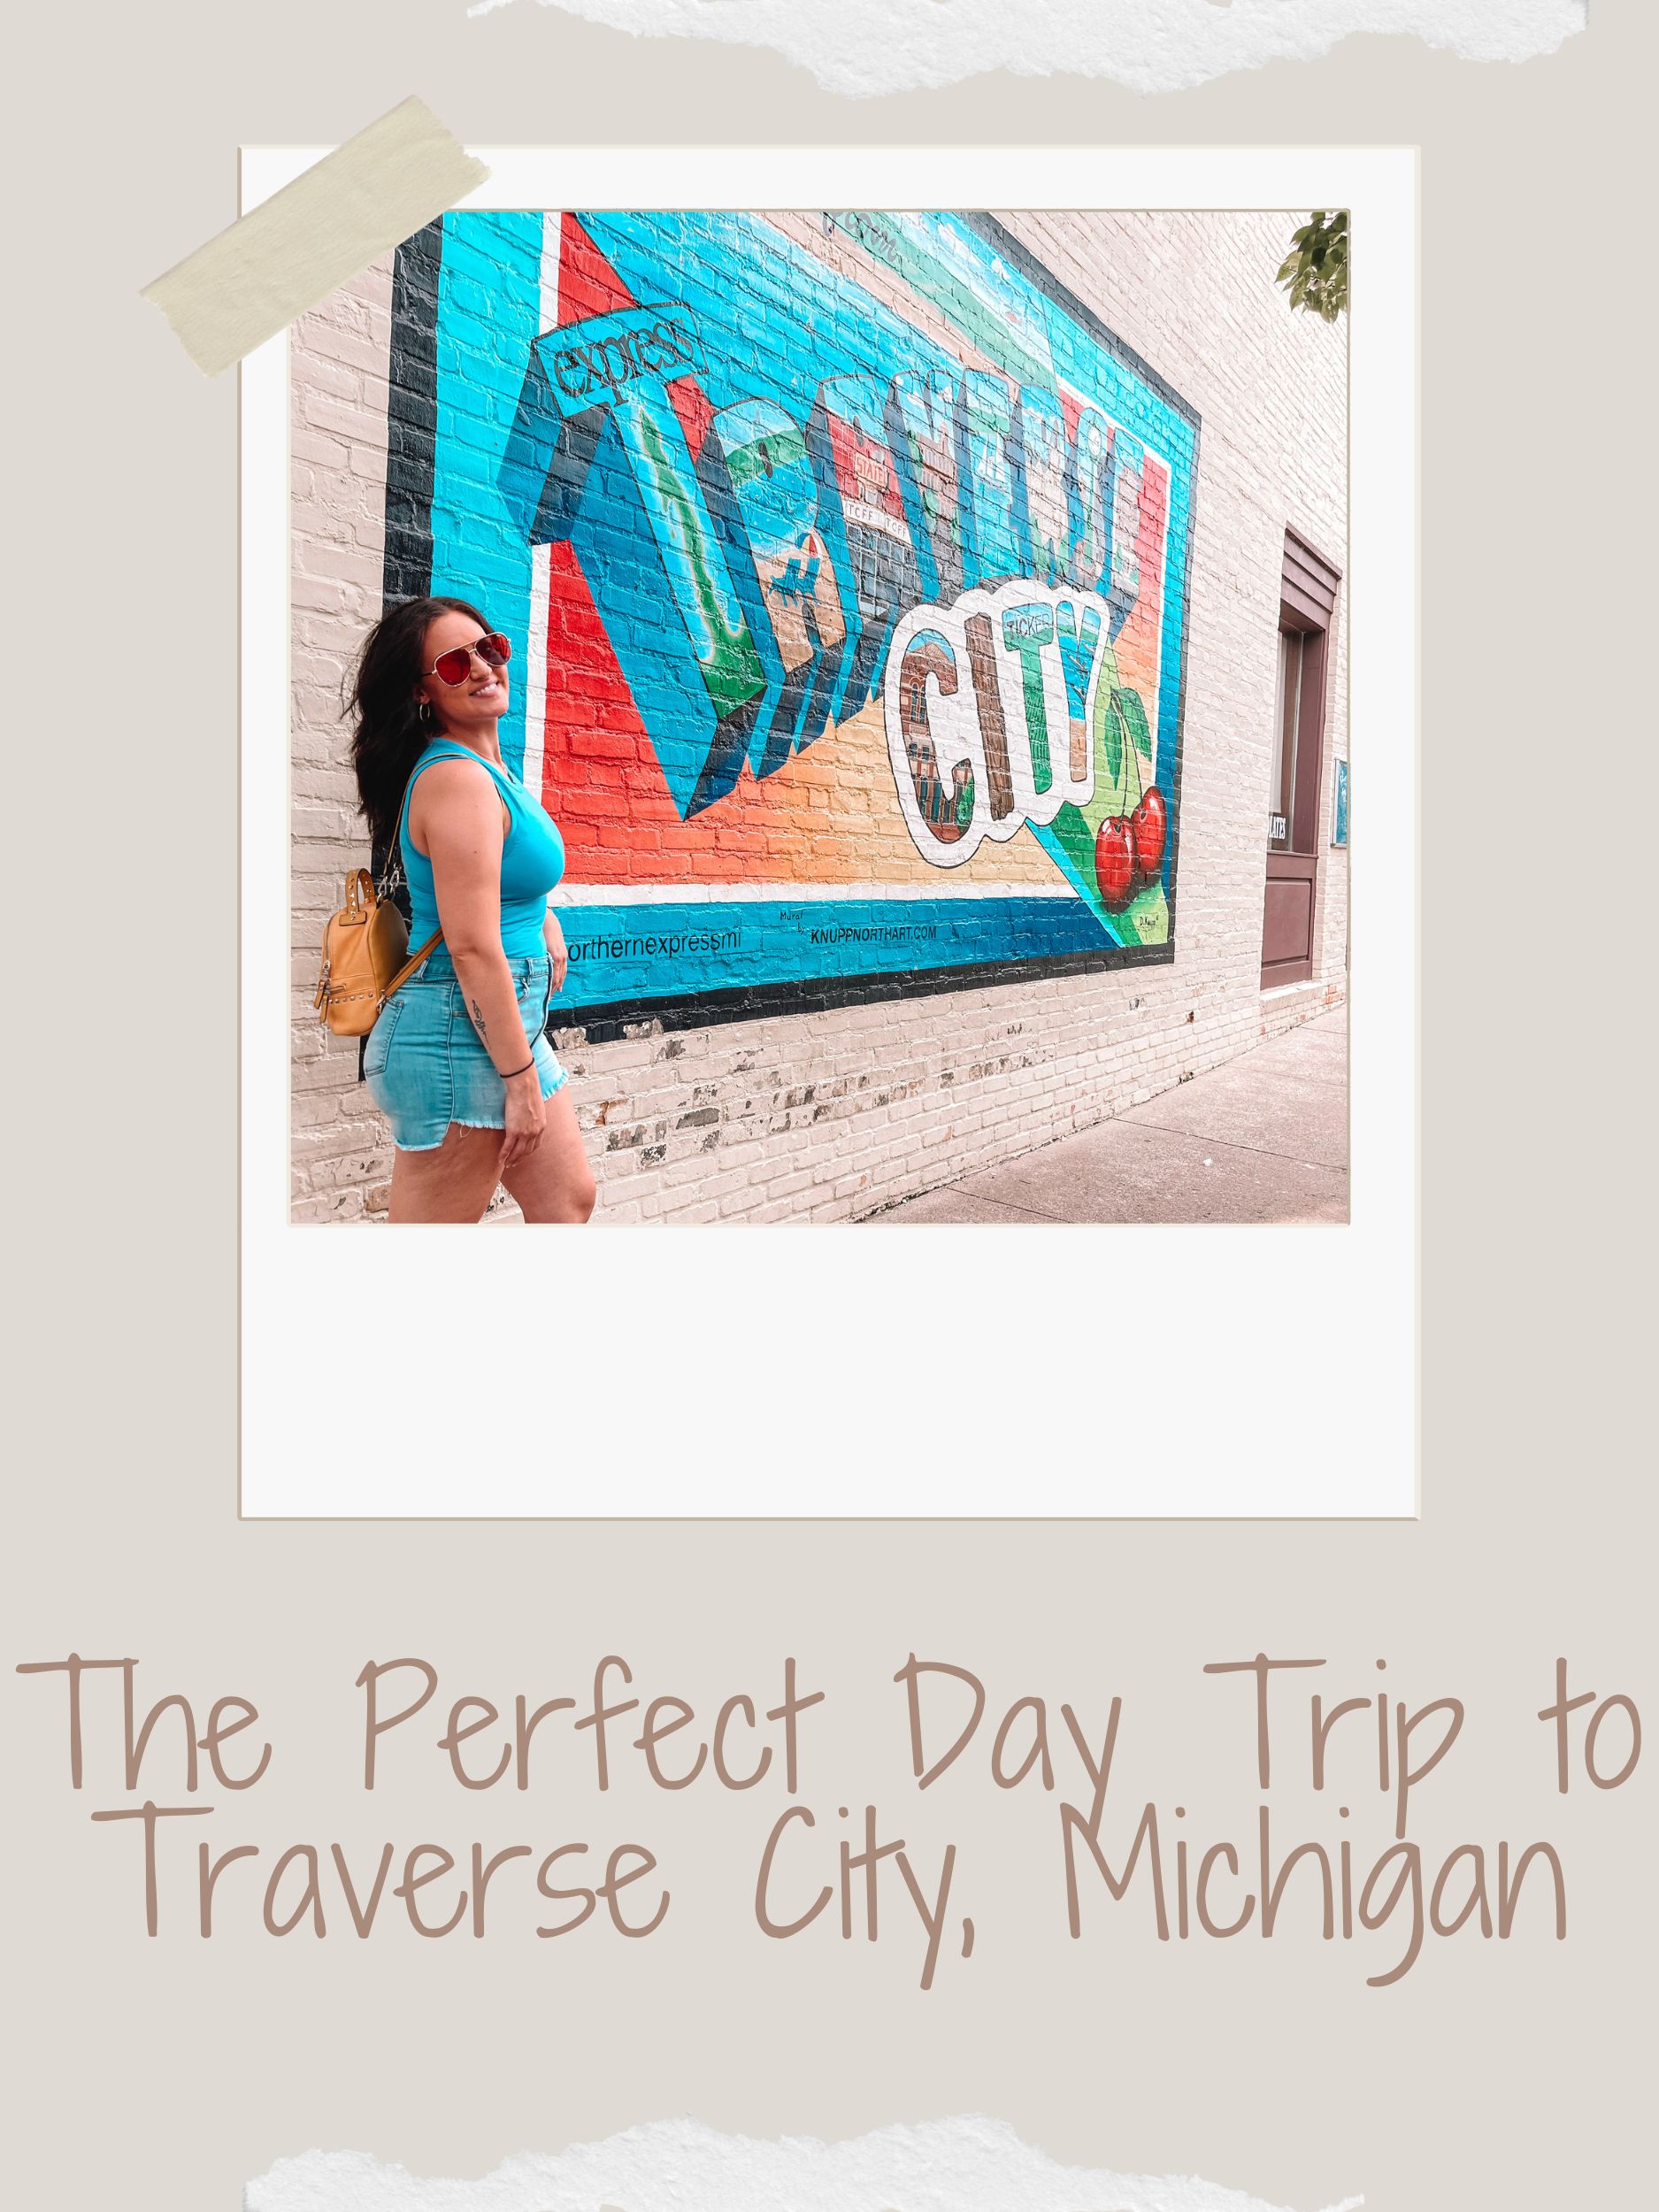 The Perfect Day Trip to Traverse City, Michigan